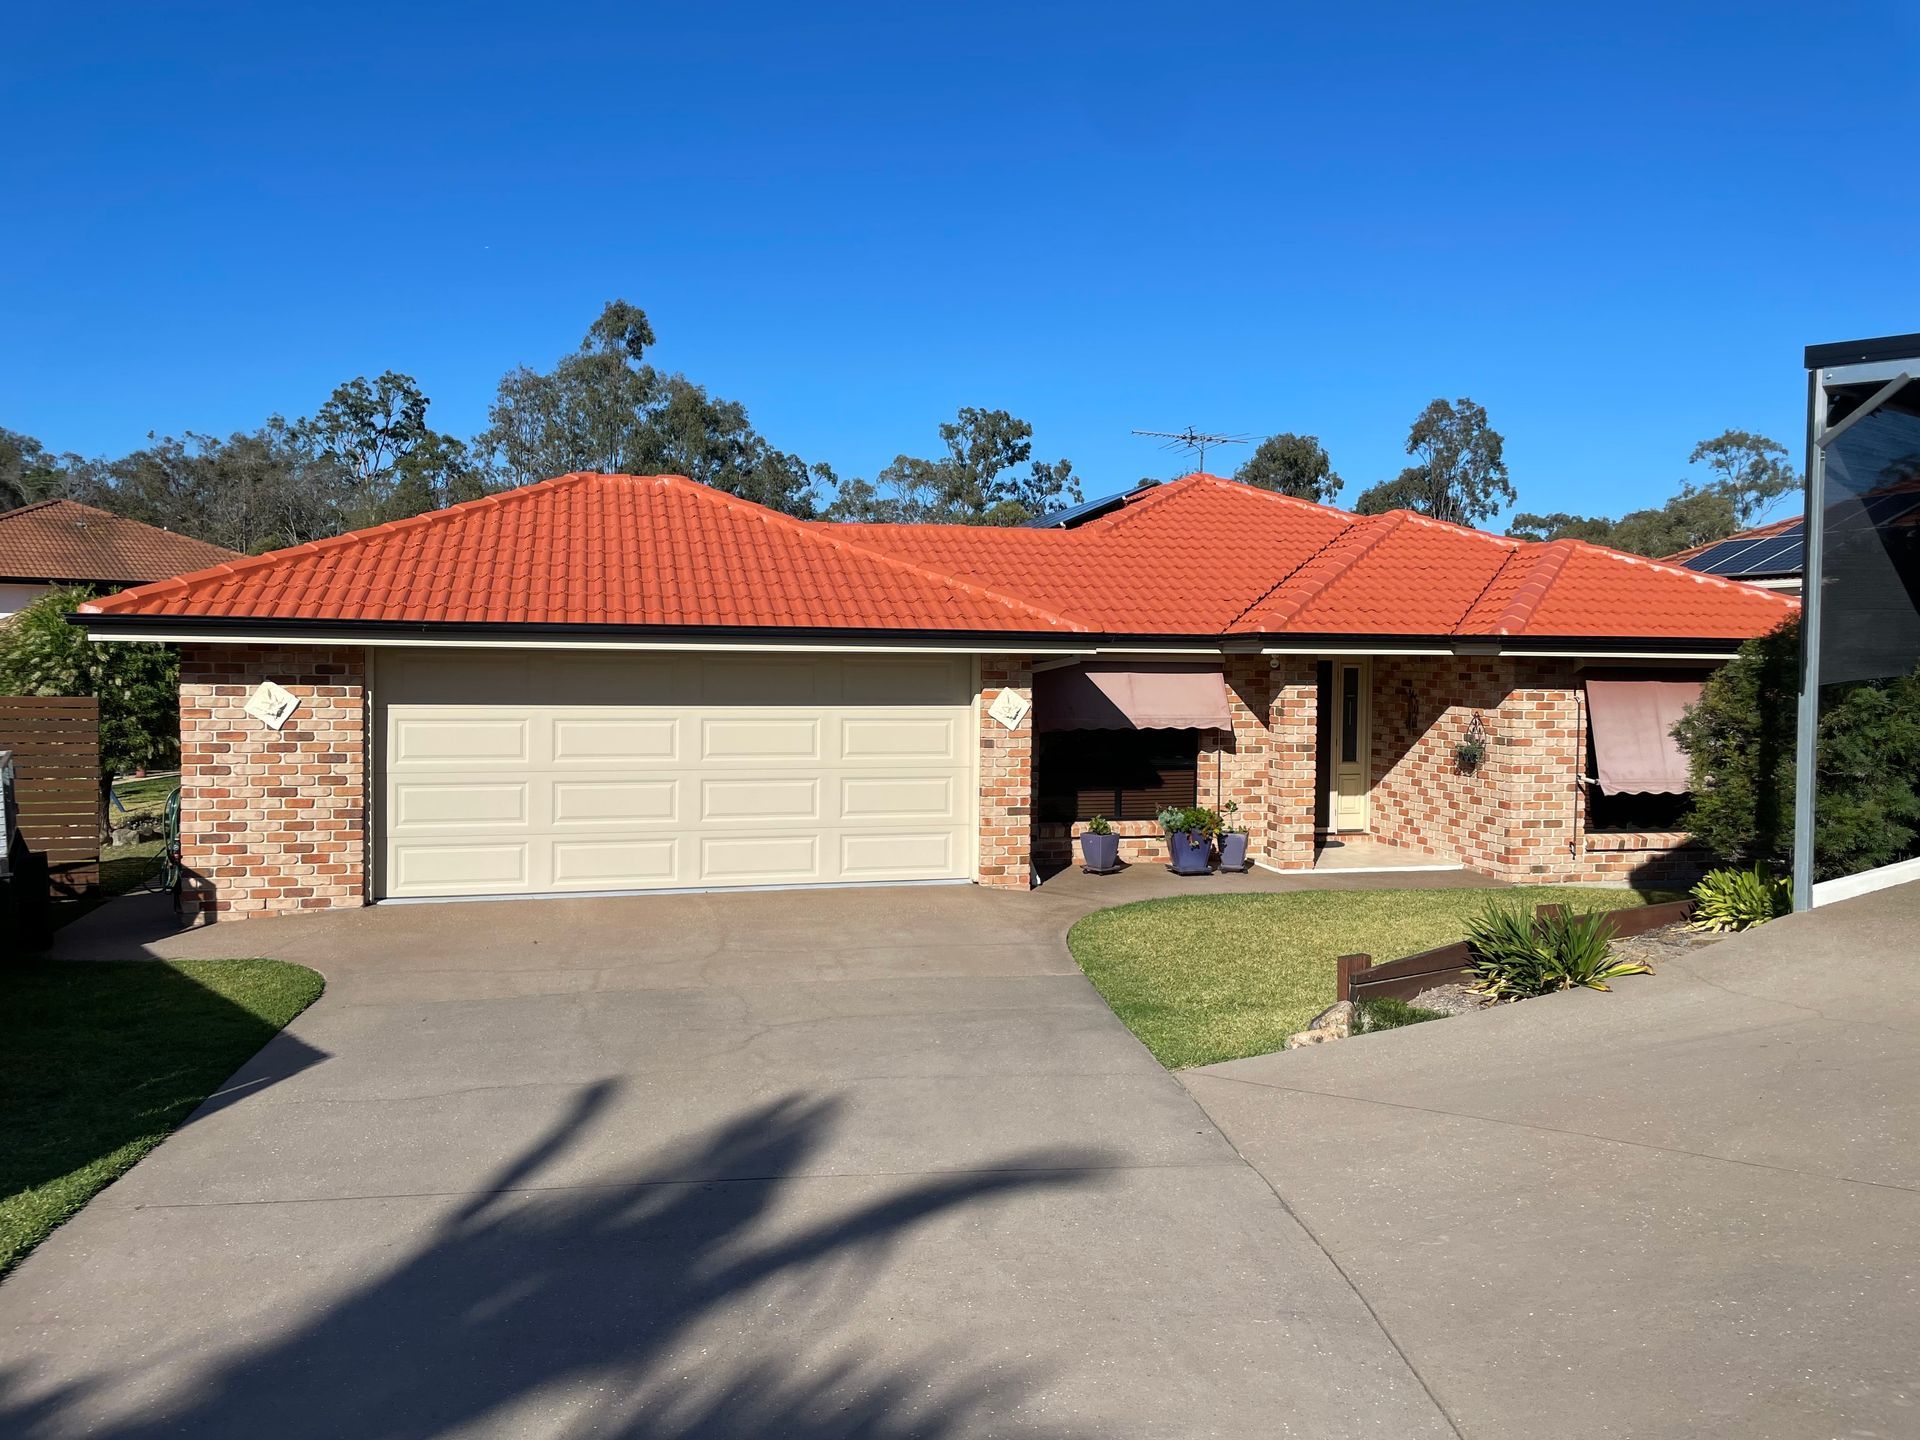 New red tiled roof — Roofer in Southport QLD